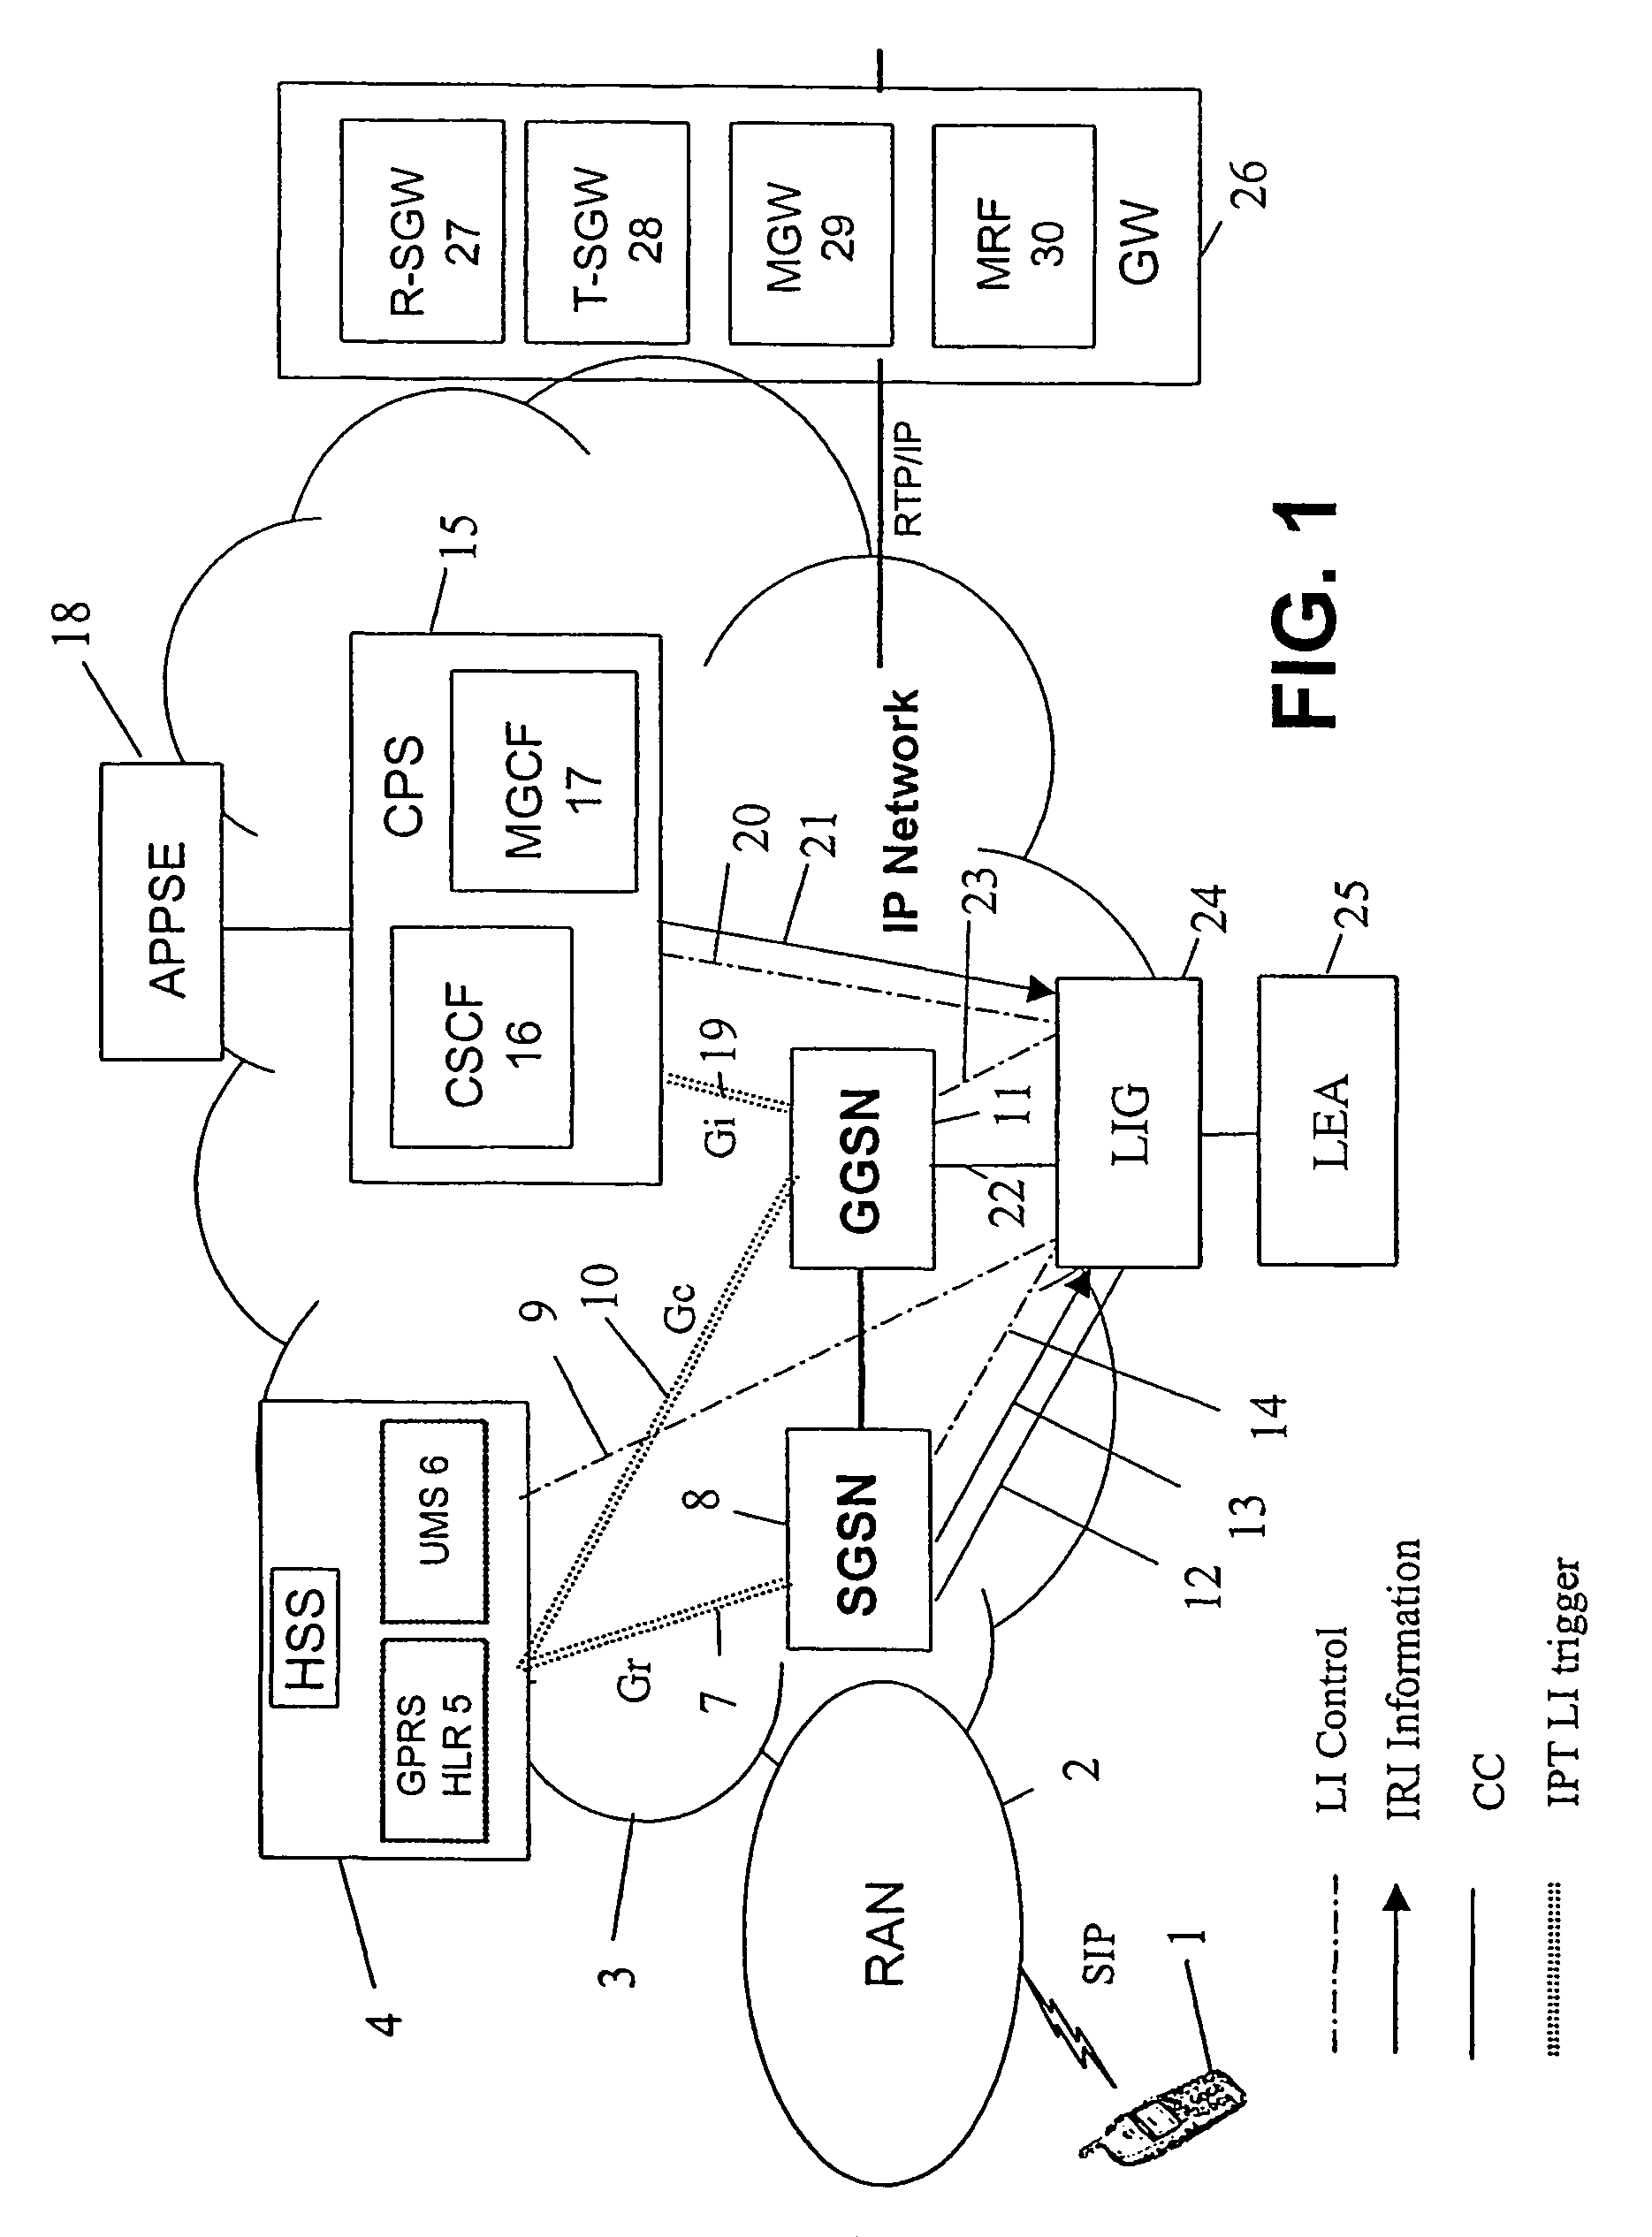 Method and system allowing lawful interception of connections such as voice-over-internet protocol calls